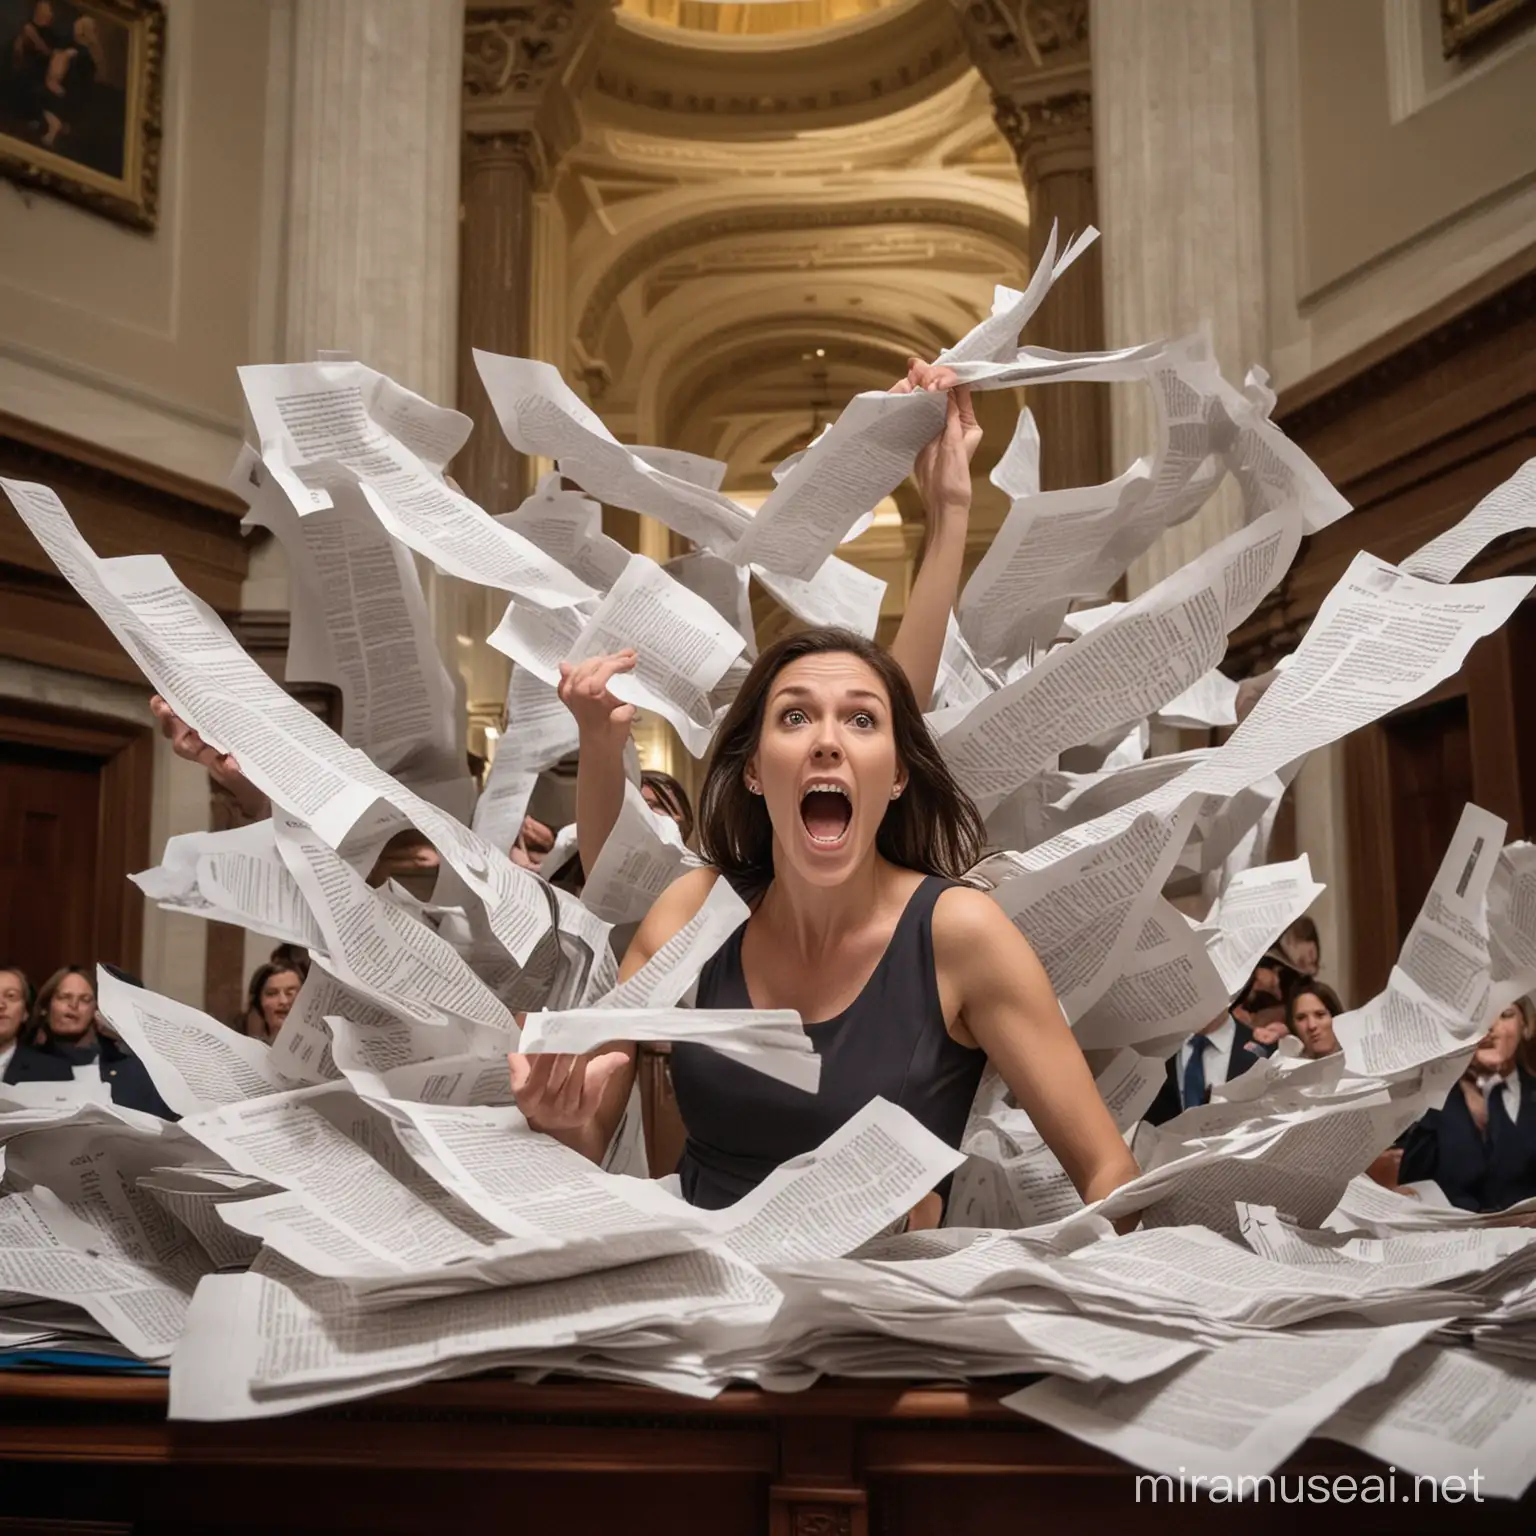 Woman with several extra arms, multiple arms, ten arms, extra arms, holds a lot of paper in her hands, flying pages, paper pile, beautiful hands, screams in the US Senate, senators sitting in the background